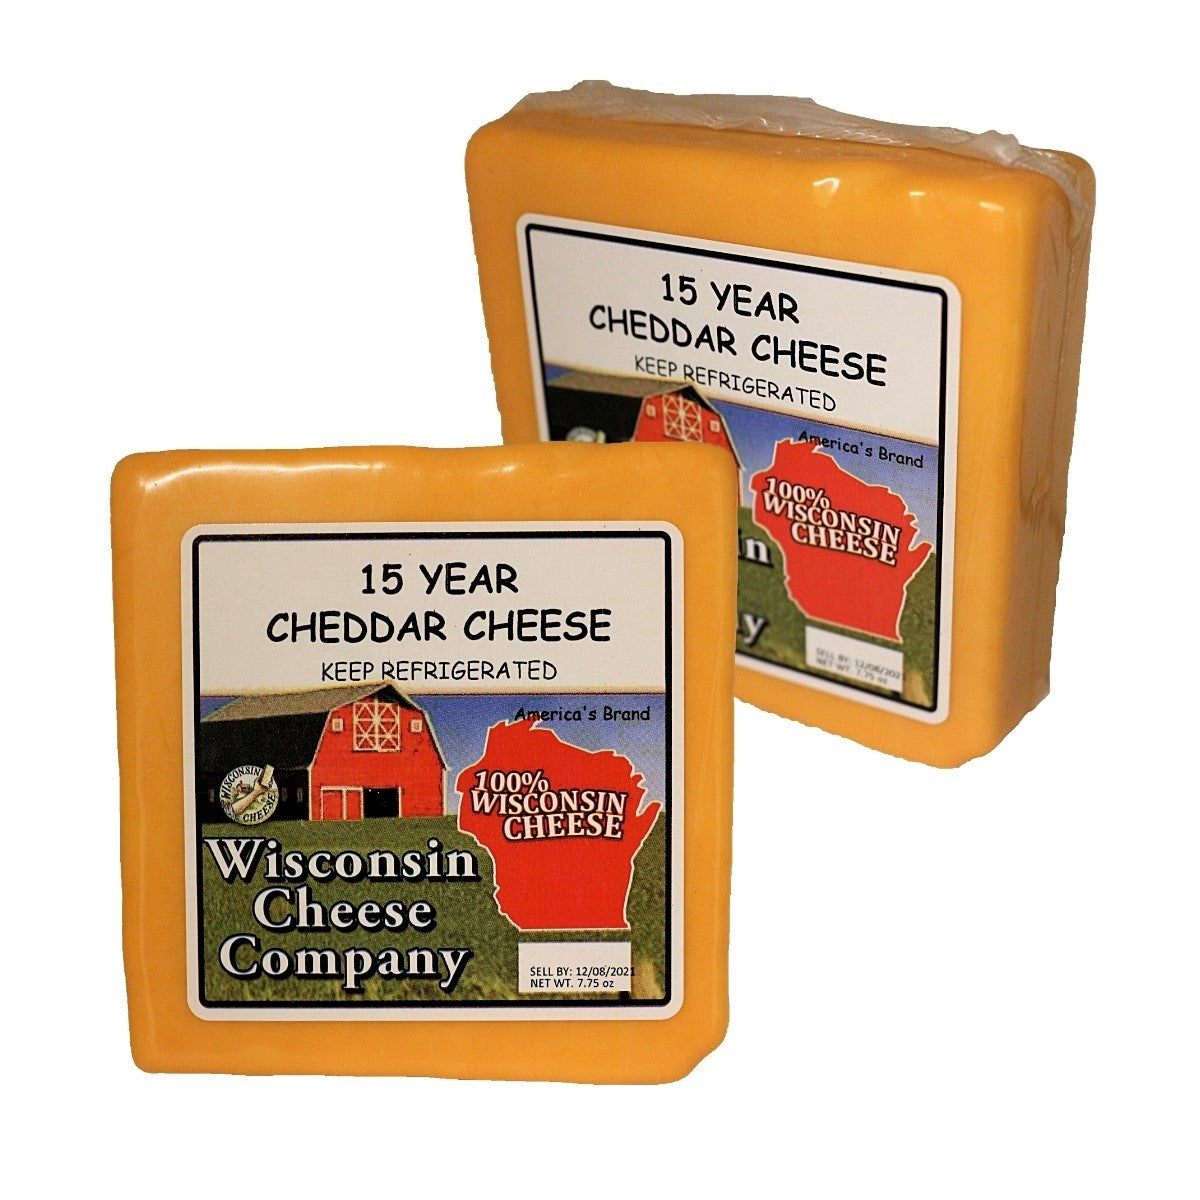 Two blocks of 15 Year Cheddar Cheese